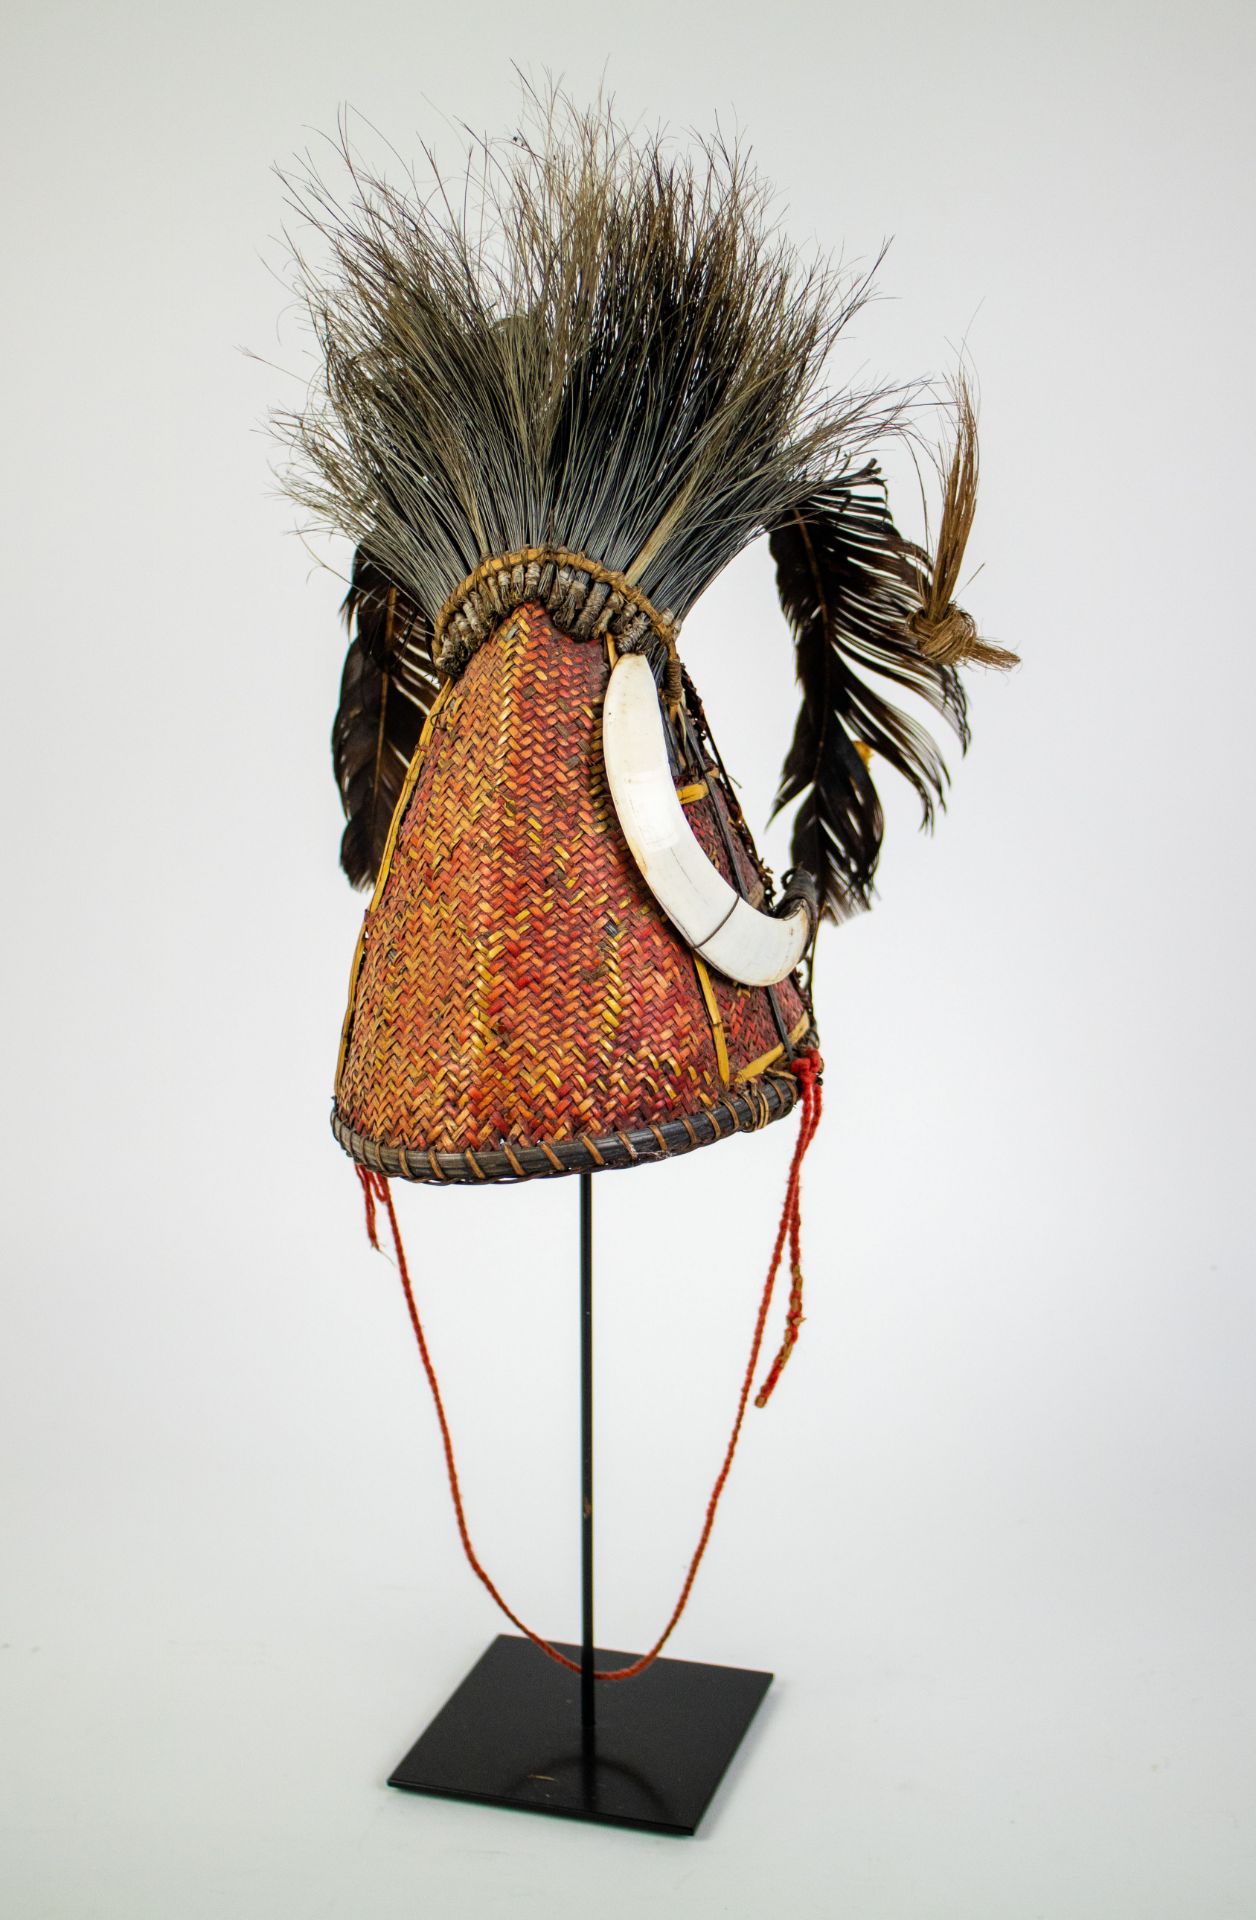 Ceremonial hat from Naga